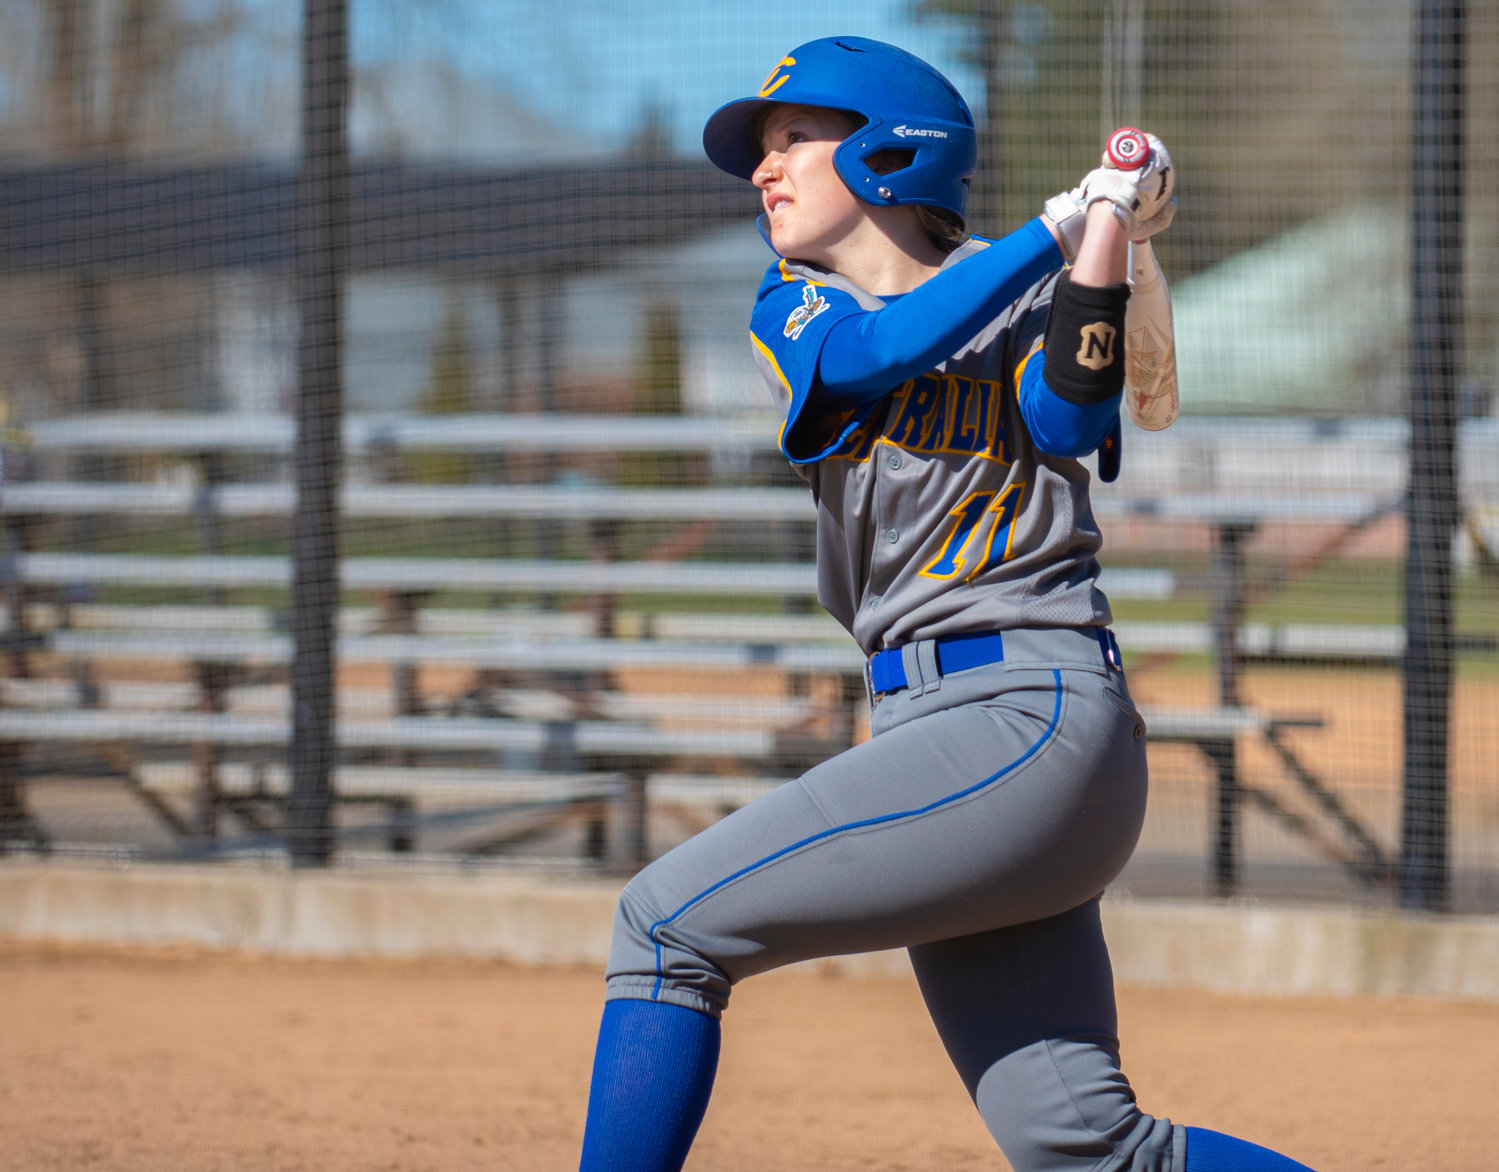 Centralia College shortstop Katie Adkins (11), a former Pe Ell-Willapa Valley player, connects on a pitch on Monday.